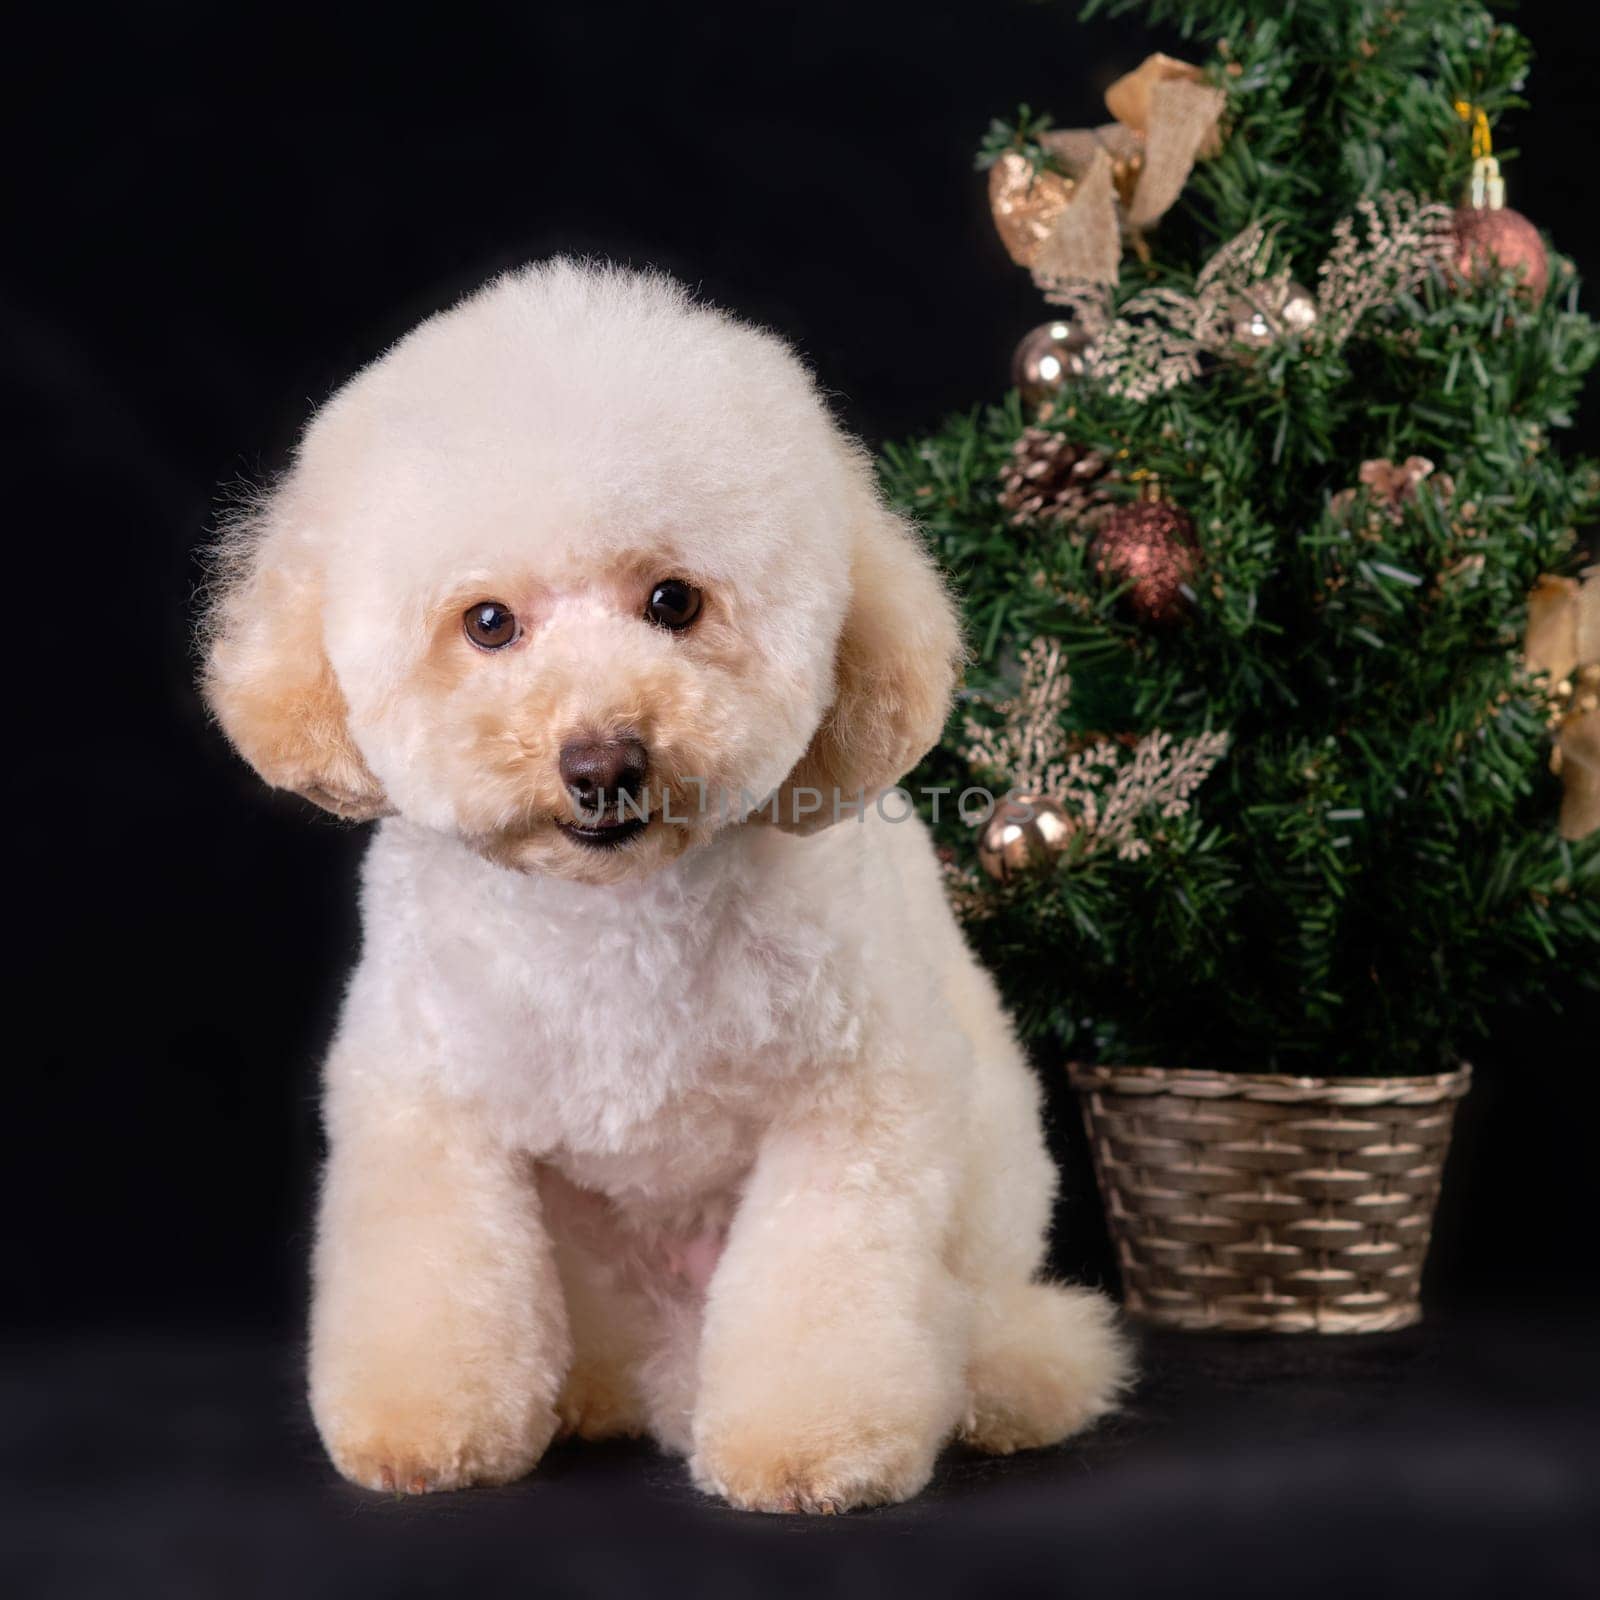 Apricot poodle puppy on the background of a Christmas tree on a black background.